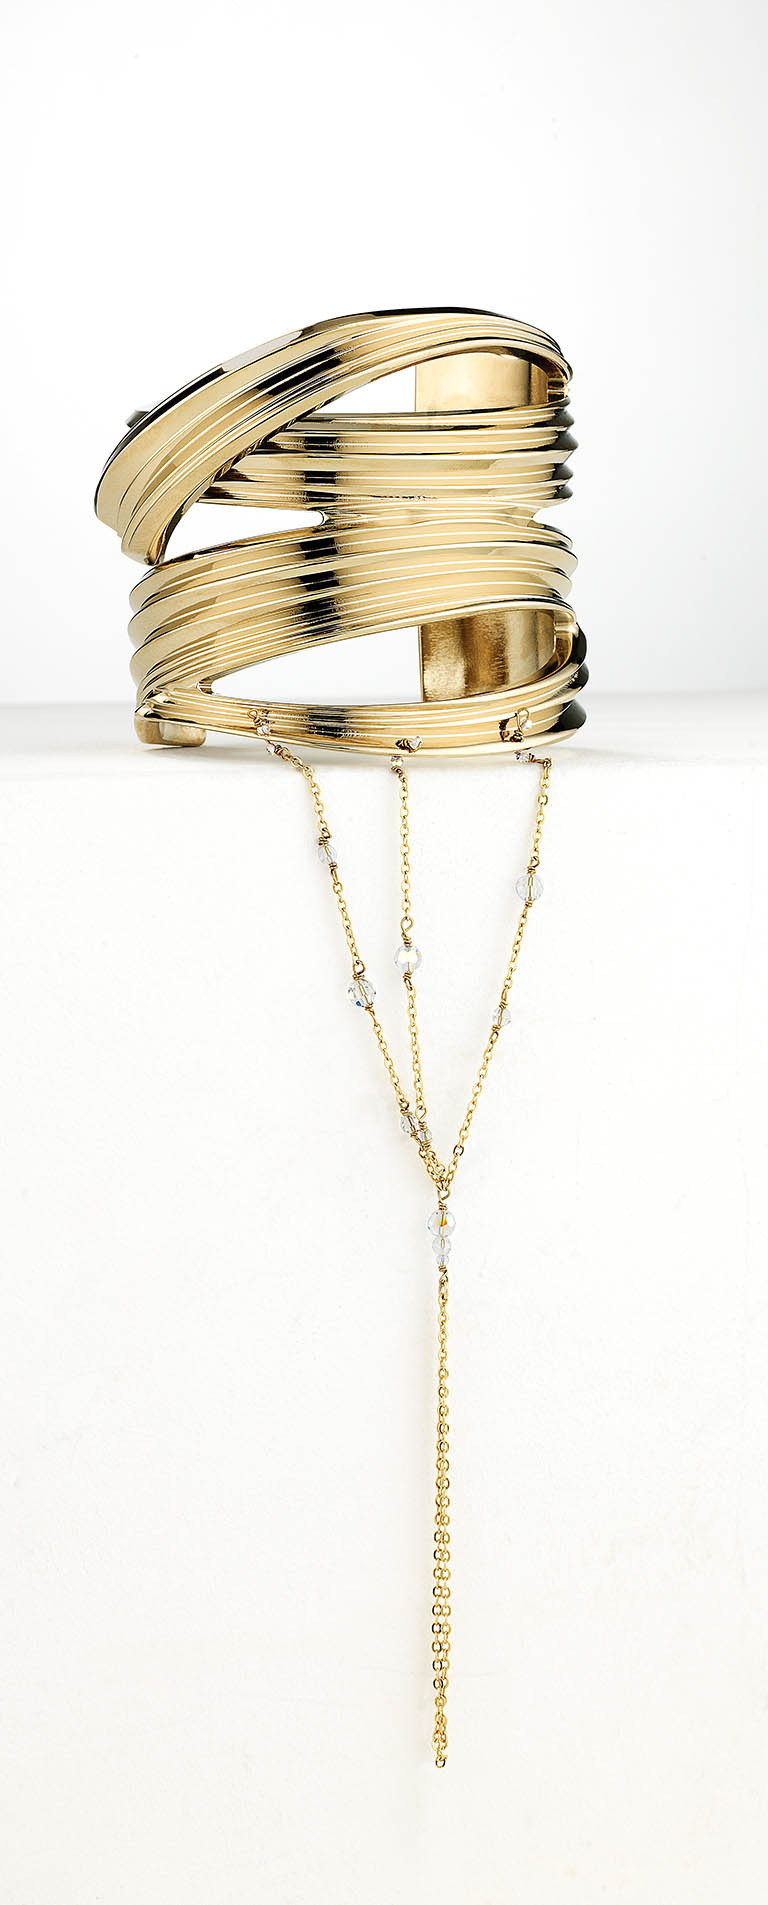 Packshot Factory - Rings - Eden Diodati gold ring with chain